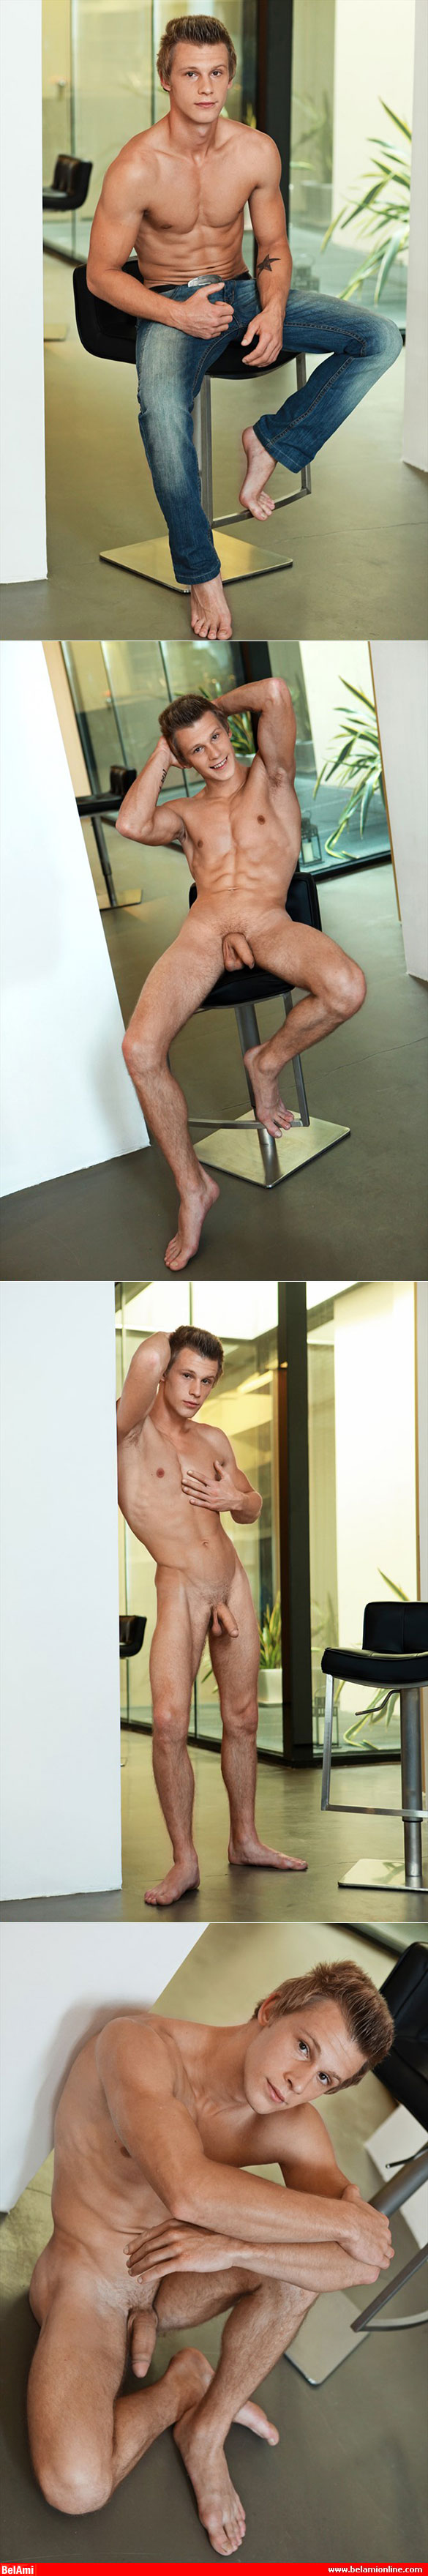 BelAmi: Griffin Phillips 'Pin-Up'